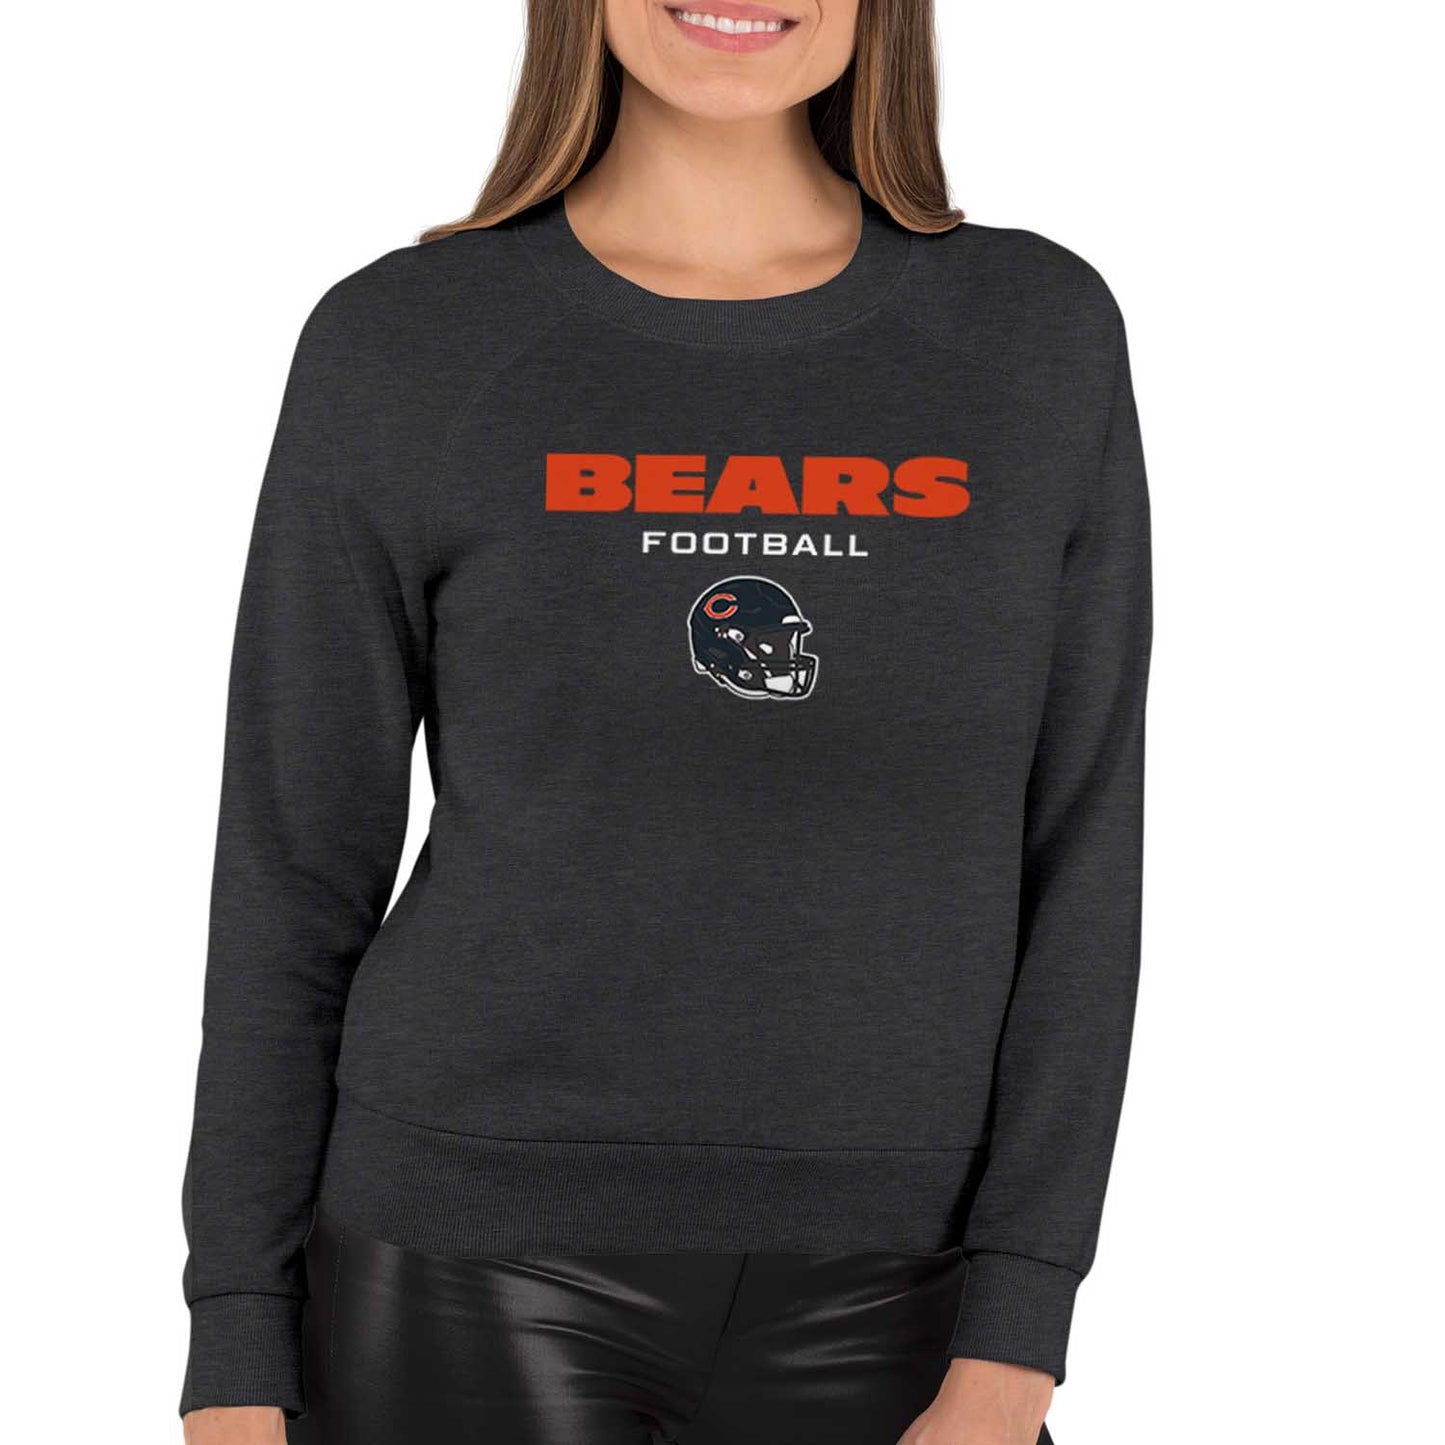 Chicago Bears Women's NFL Football Helmet Charcoal Slouchy Crewneck -Tagless Lightweight Pullover - Charcoal